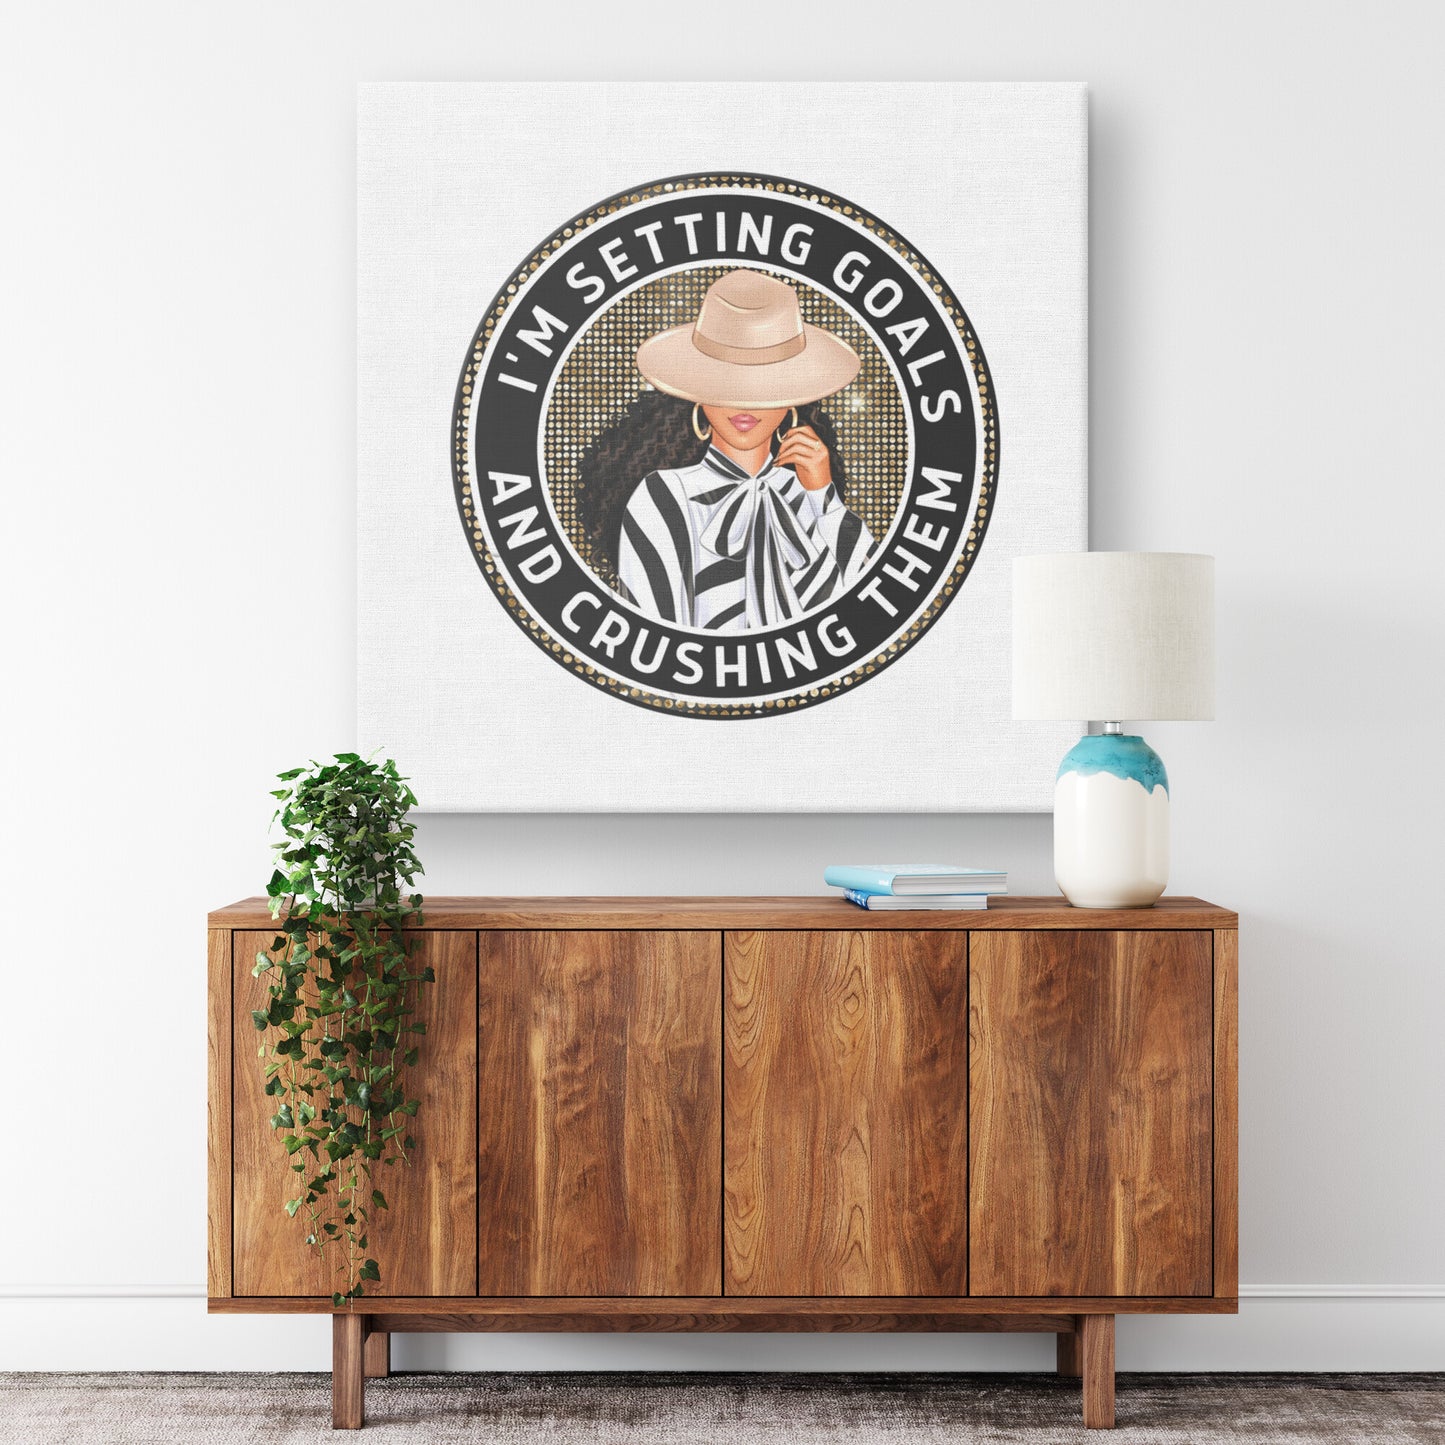 Setting Goals and Crushing Them Canvas, Canva Poster, Canva wall Art